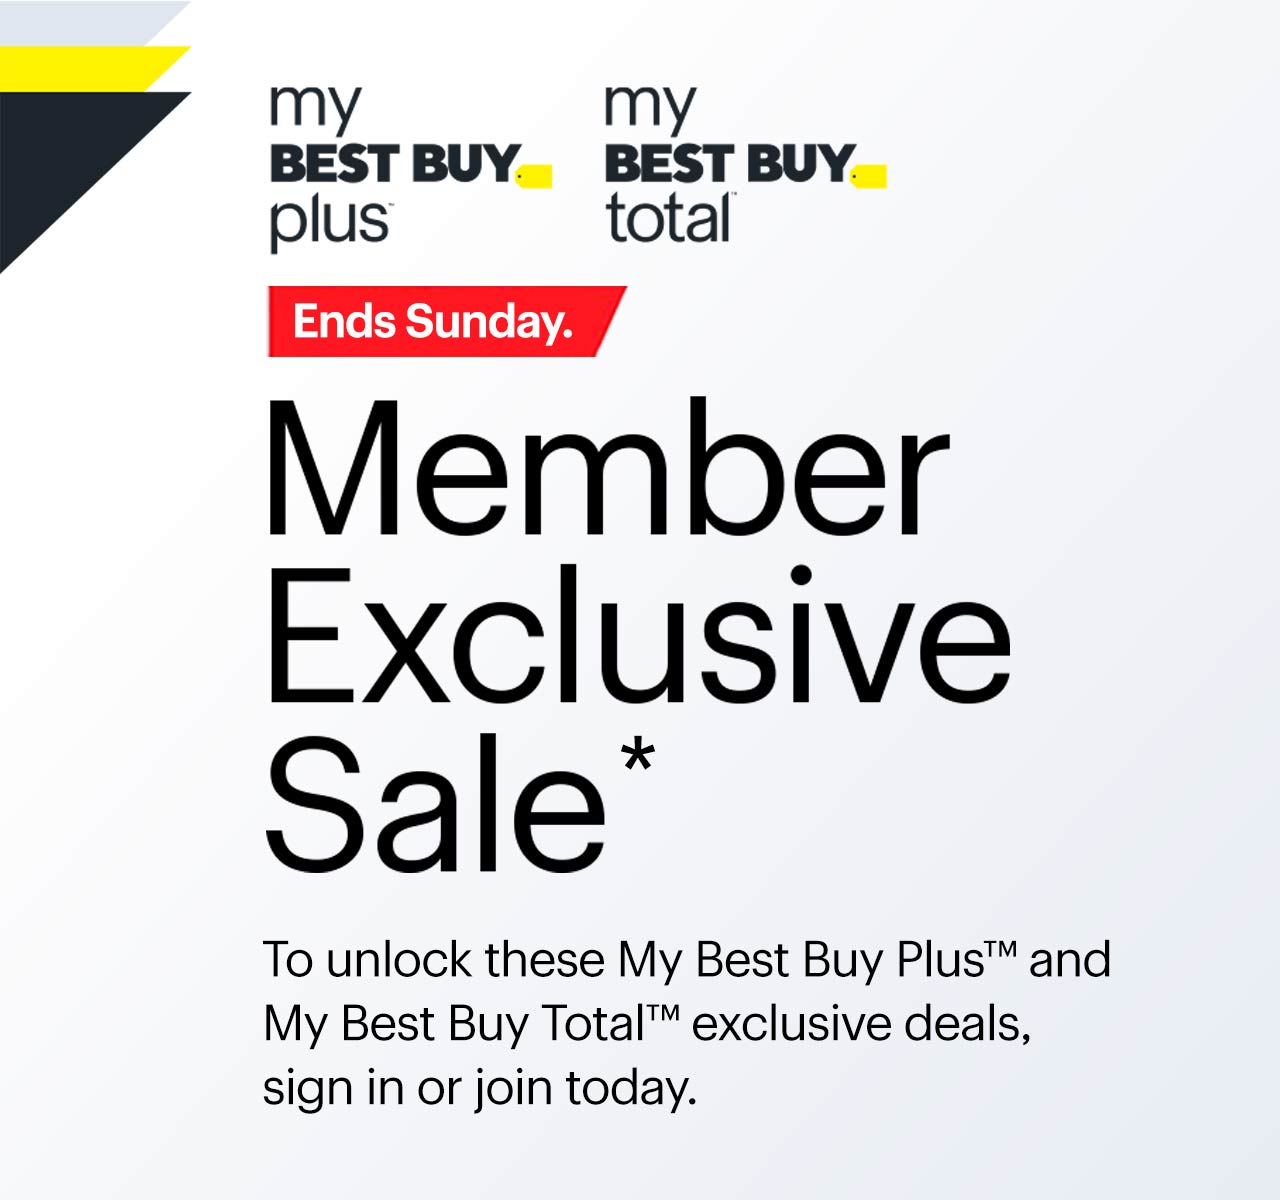 Member Exclusive Sale. Ends Sunday. To unlock these My Best Buy Plus™ and My Best Buy Total™ exclusive deals, sign in or join today. Reference disclaimer.